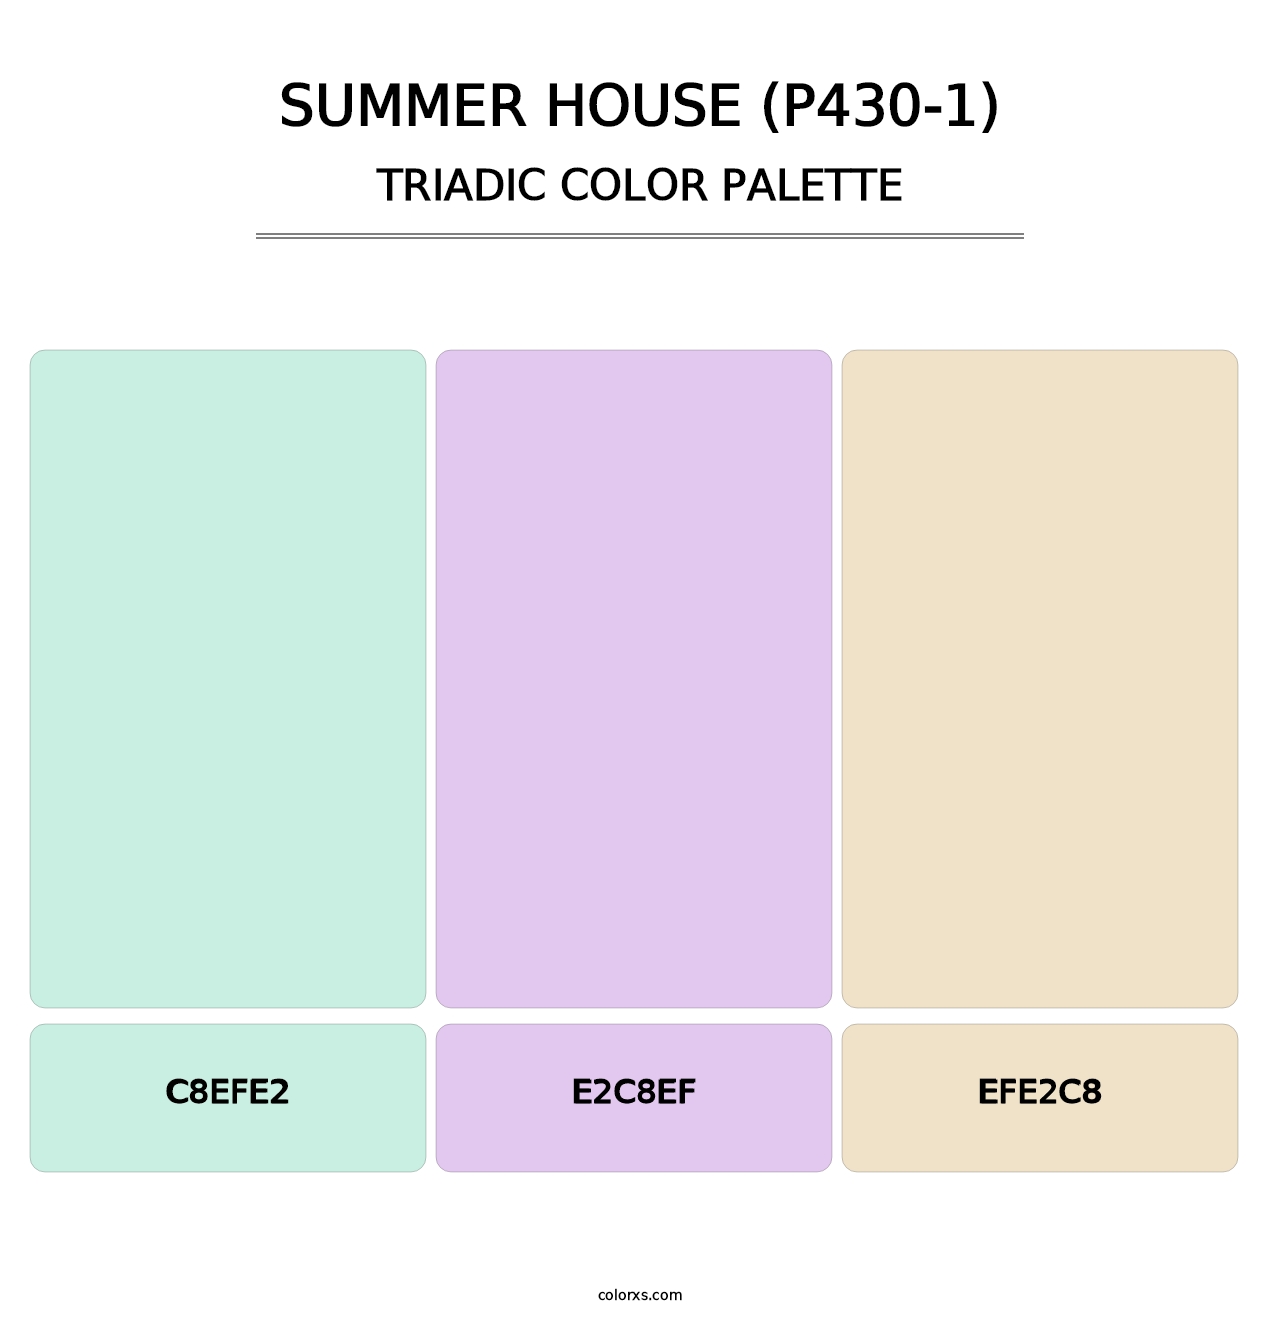 Summer House (P430-1) - Triadic Color Palette